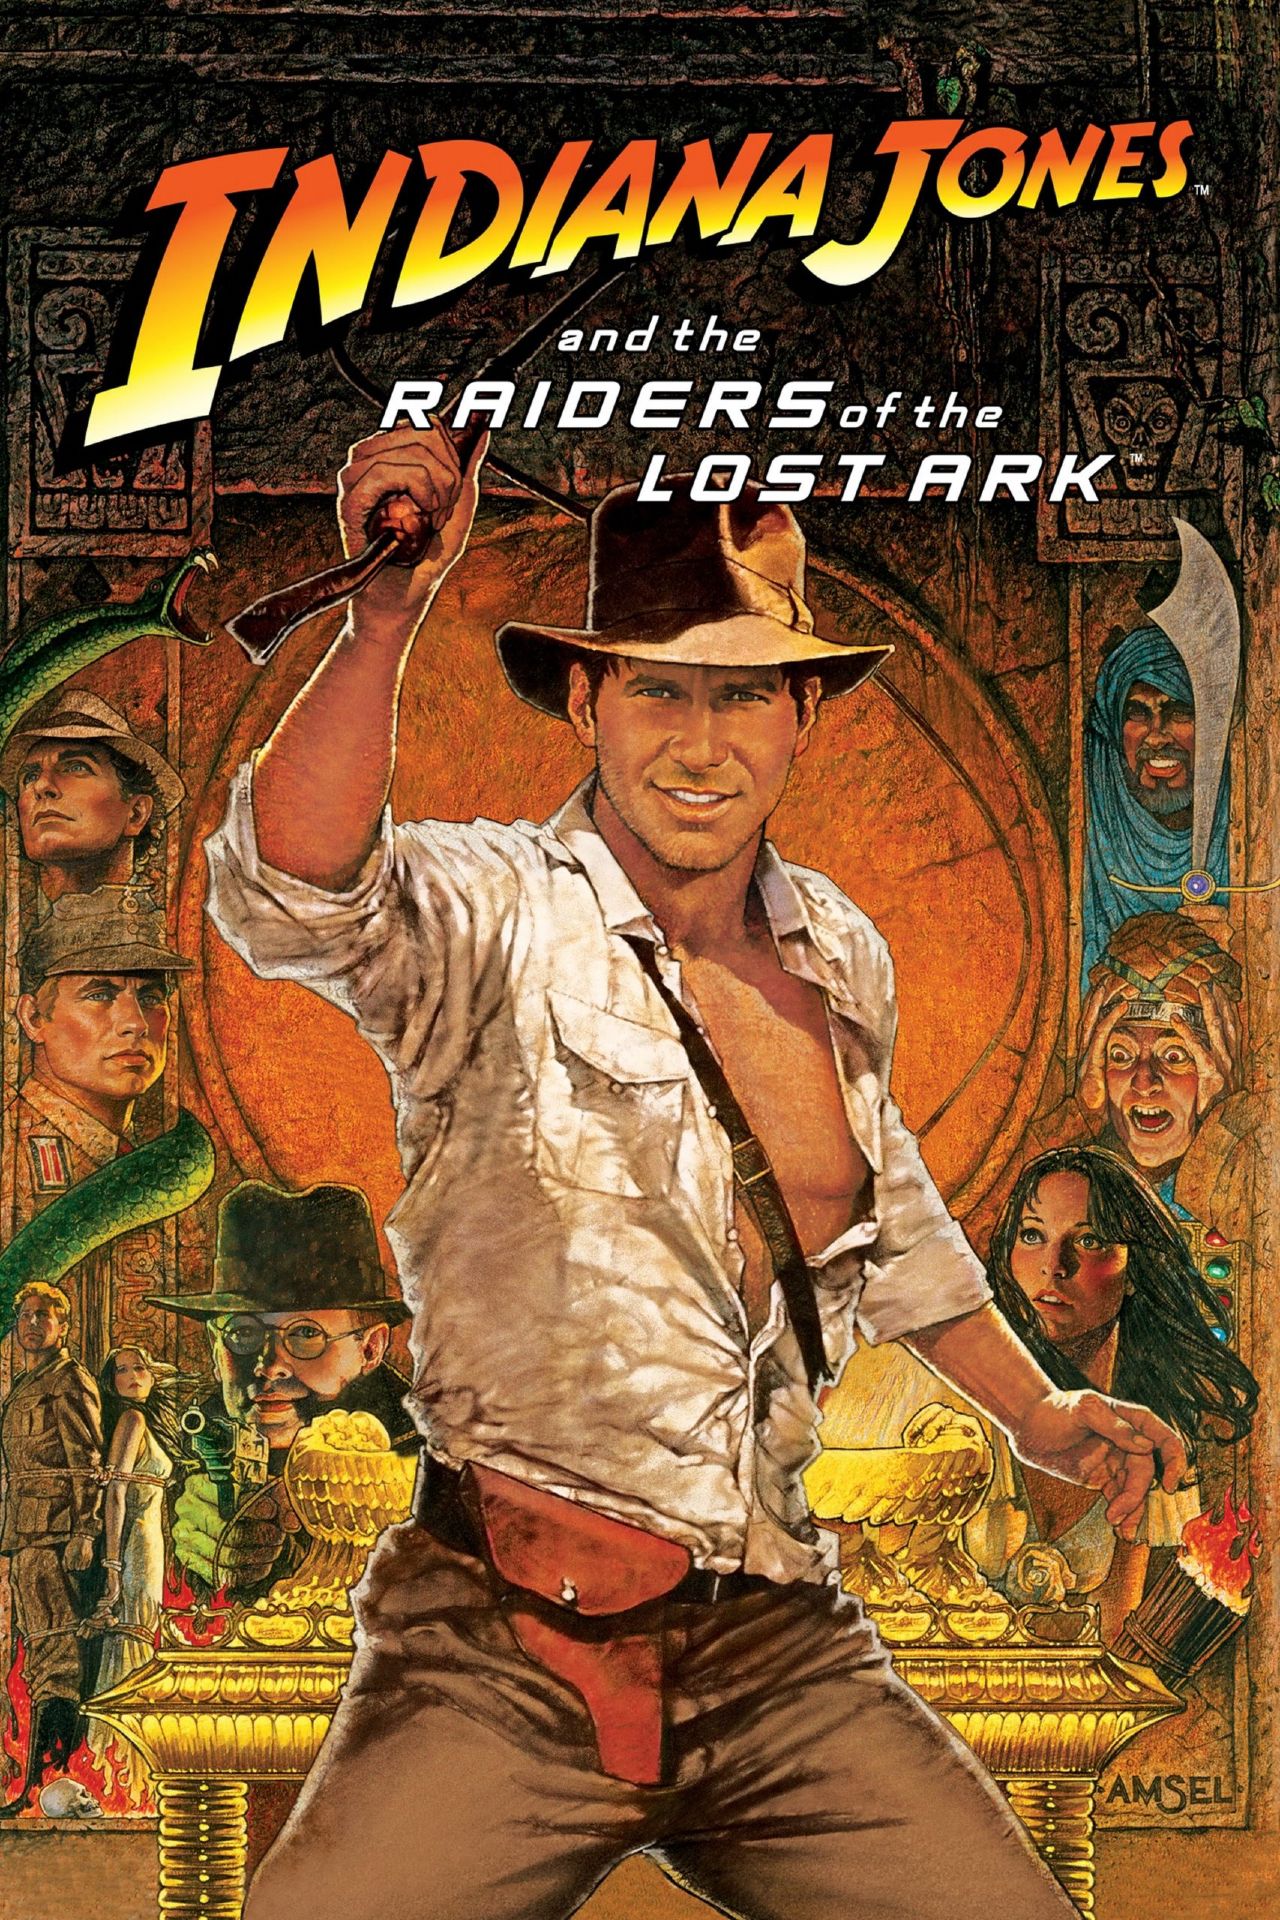 Indiana Jones and the raiders of the lost ark movie poster